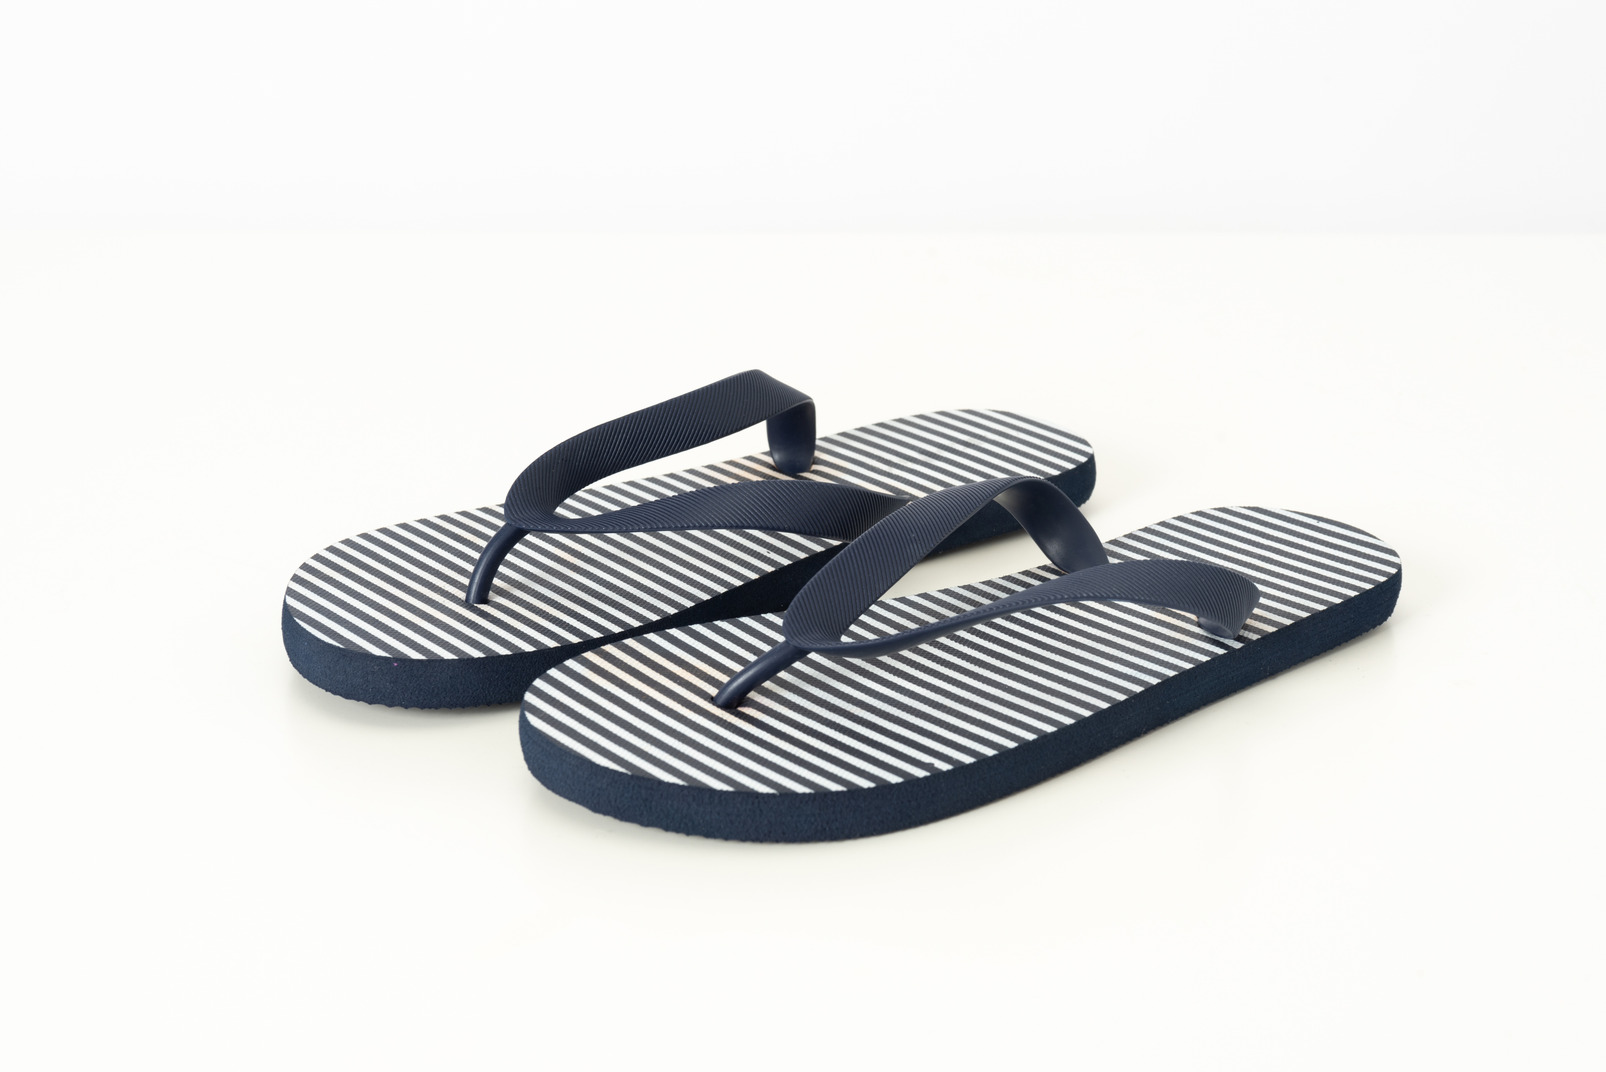 Blue and white flip-flops on a white background